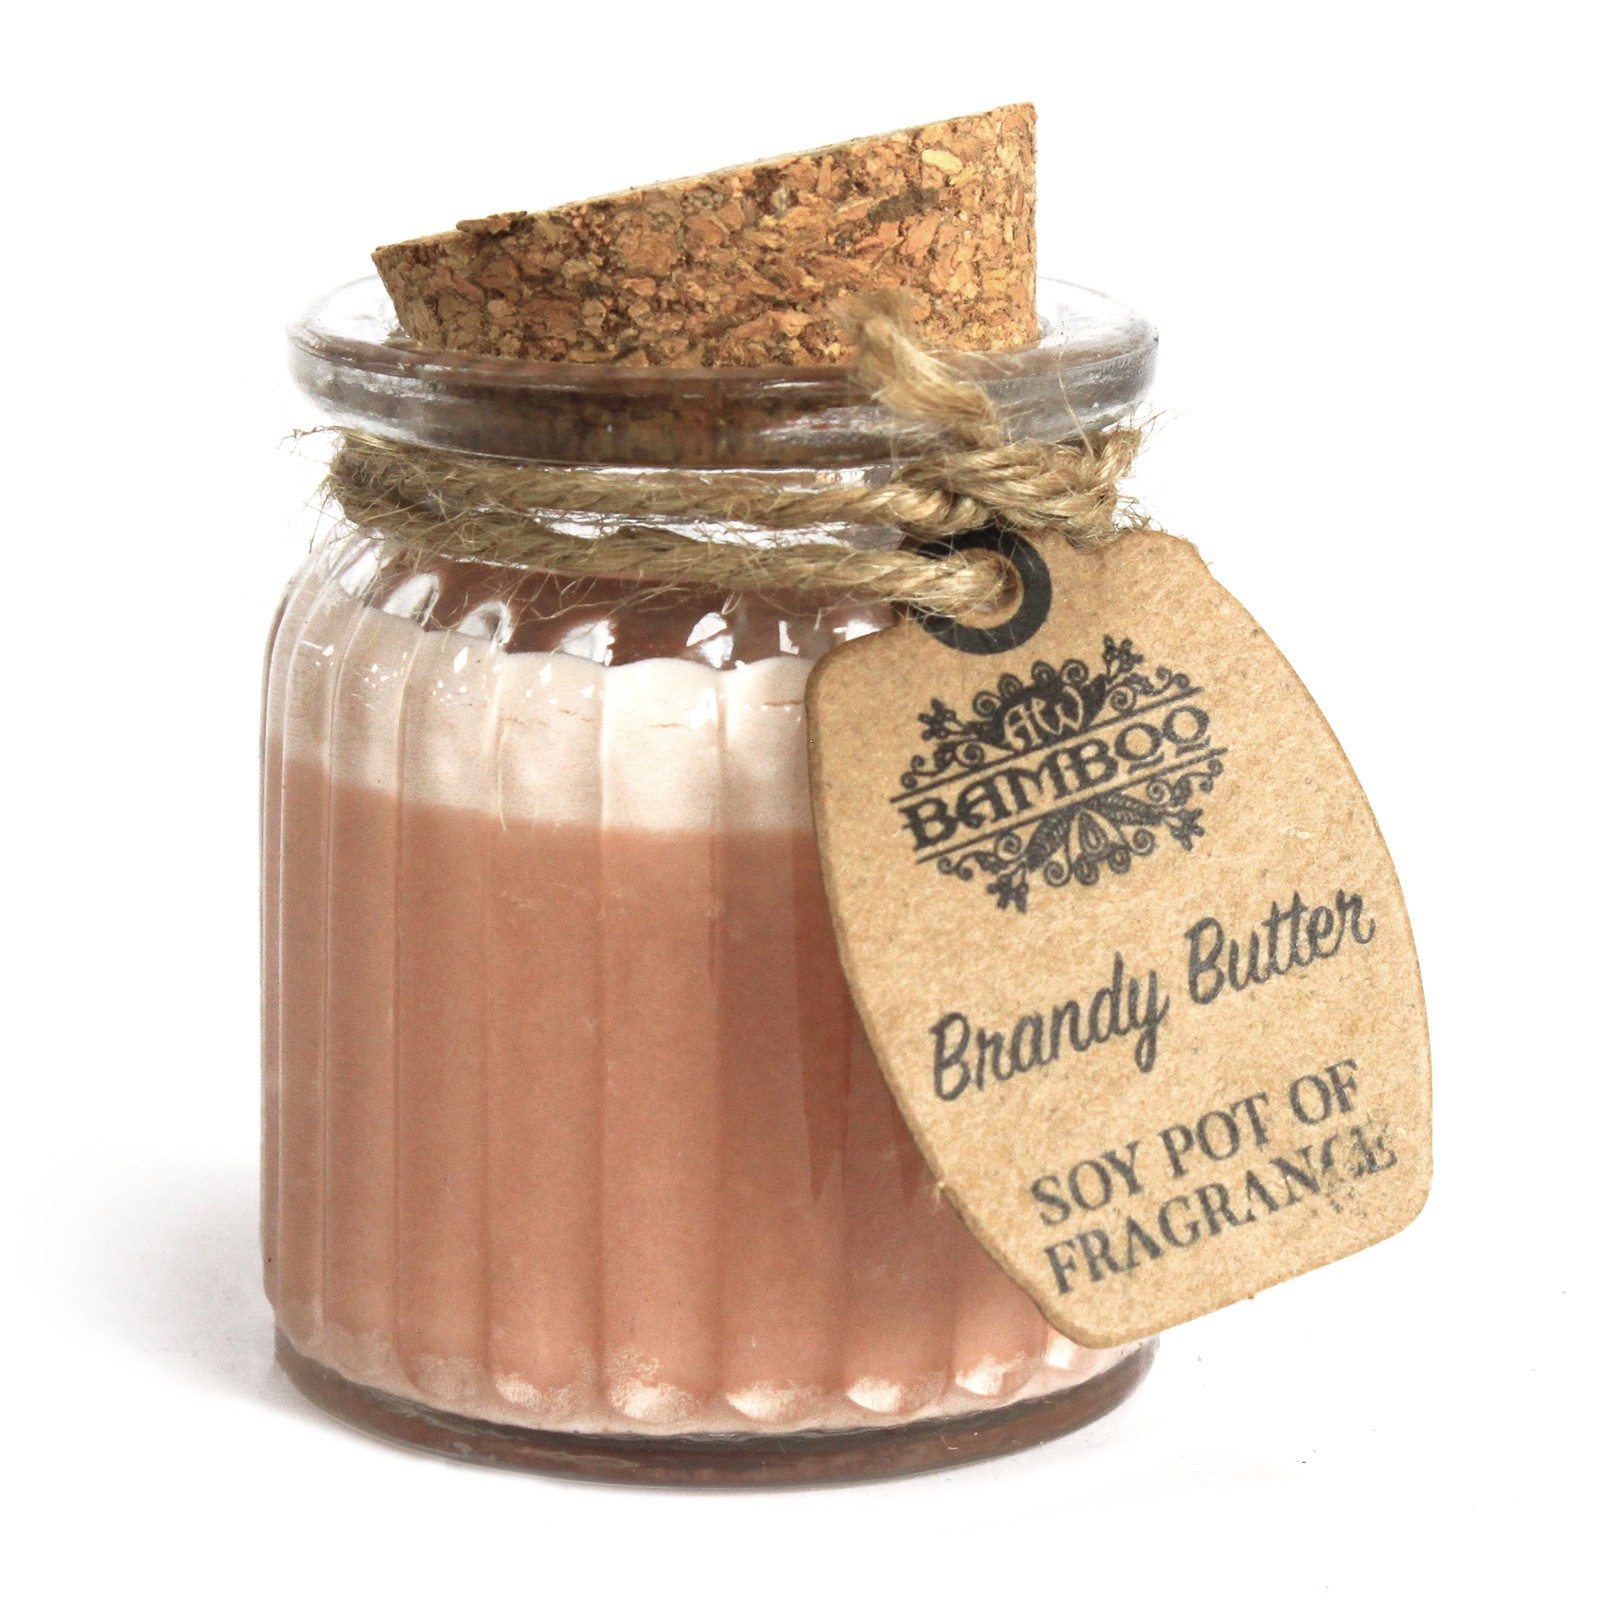 Brandy Butter Soy Wax Candle - Scented Pot Candle